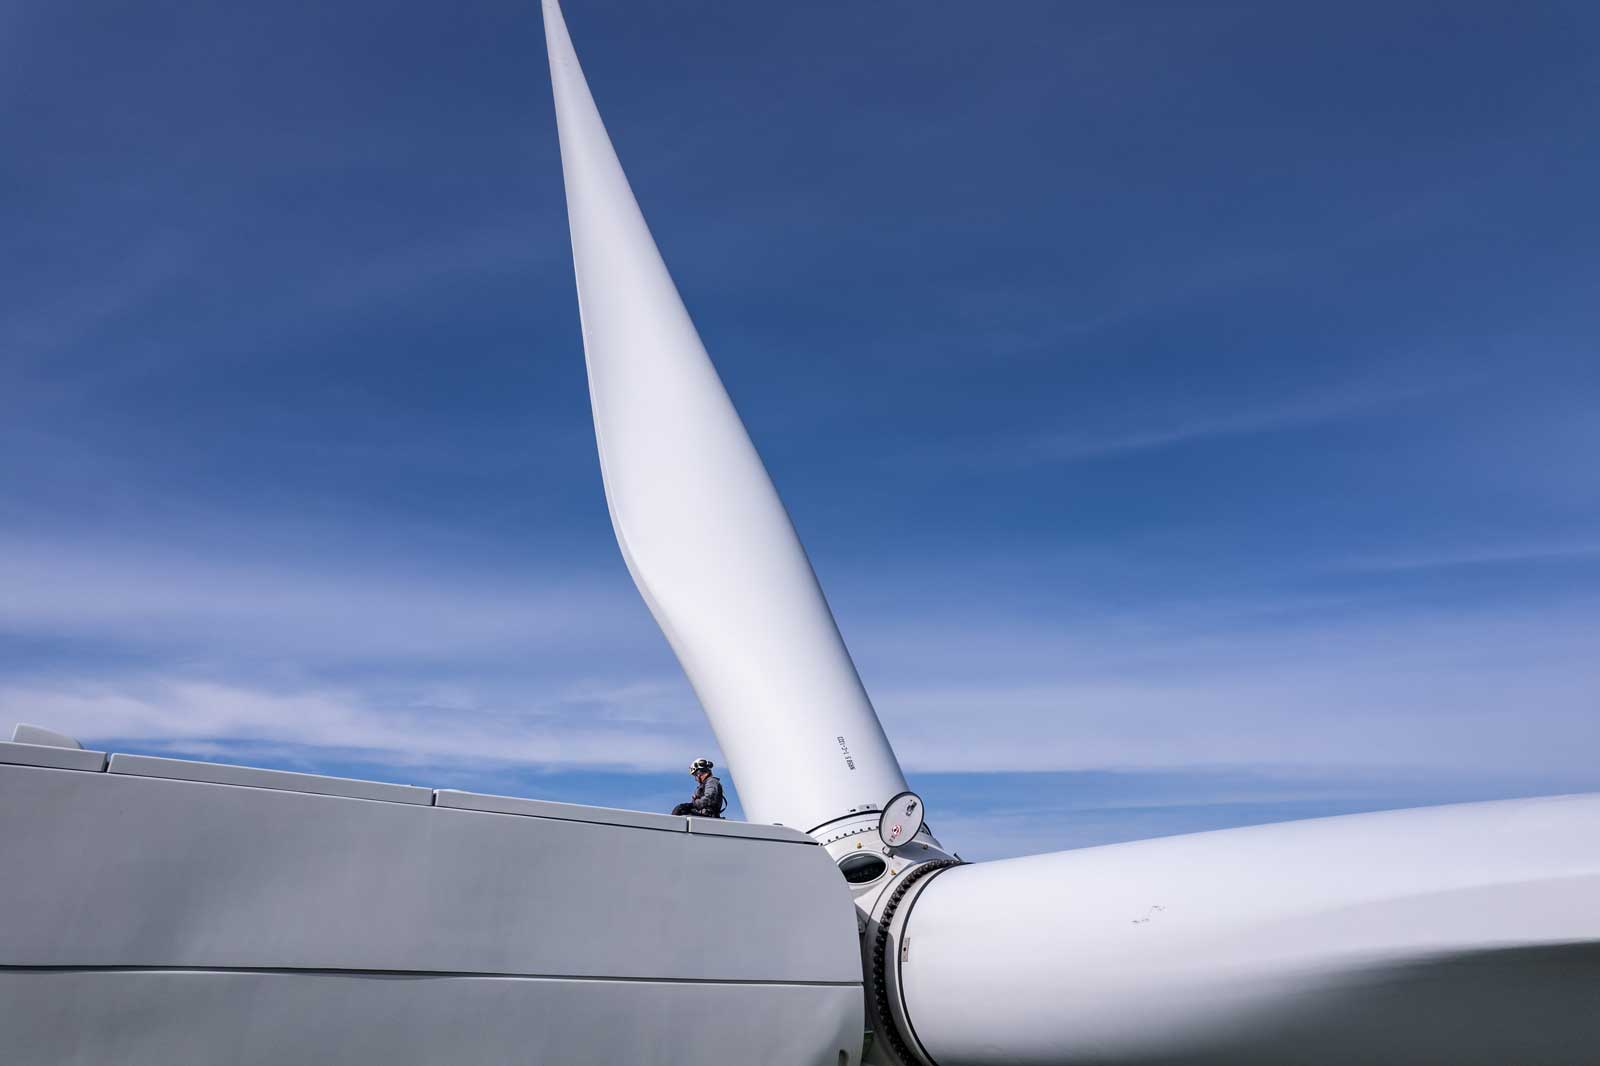 Wind Farm Technician | Who we are looking for at RWE in the Americas